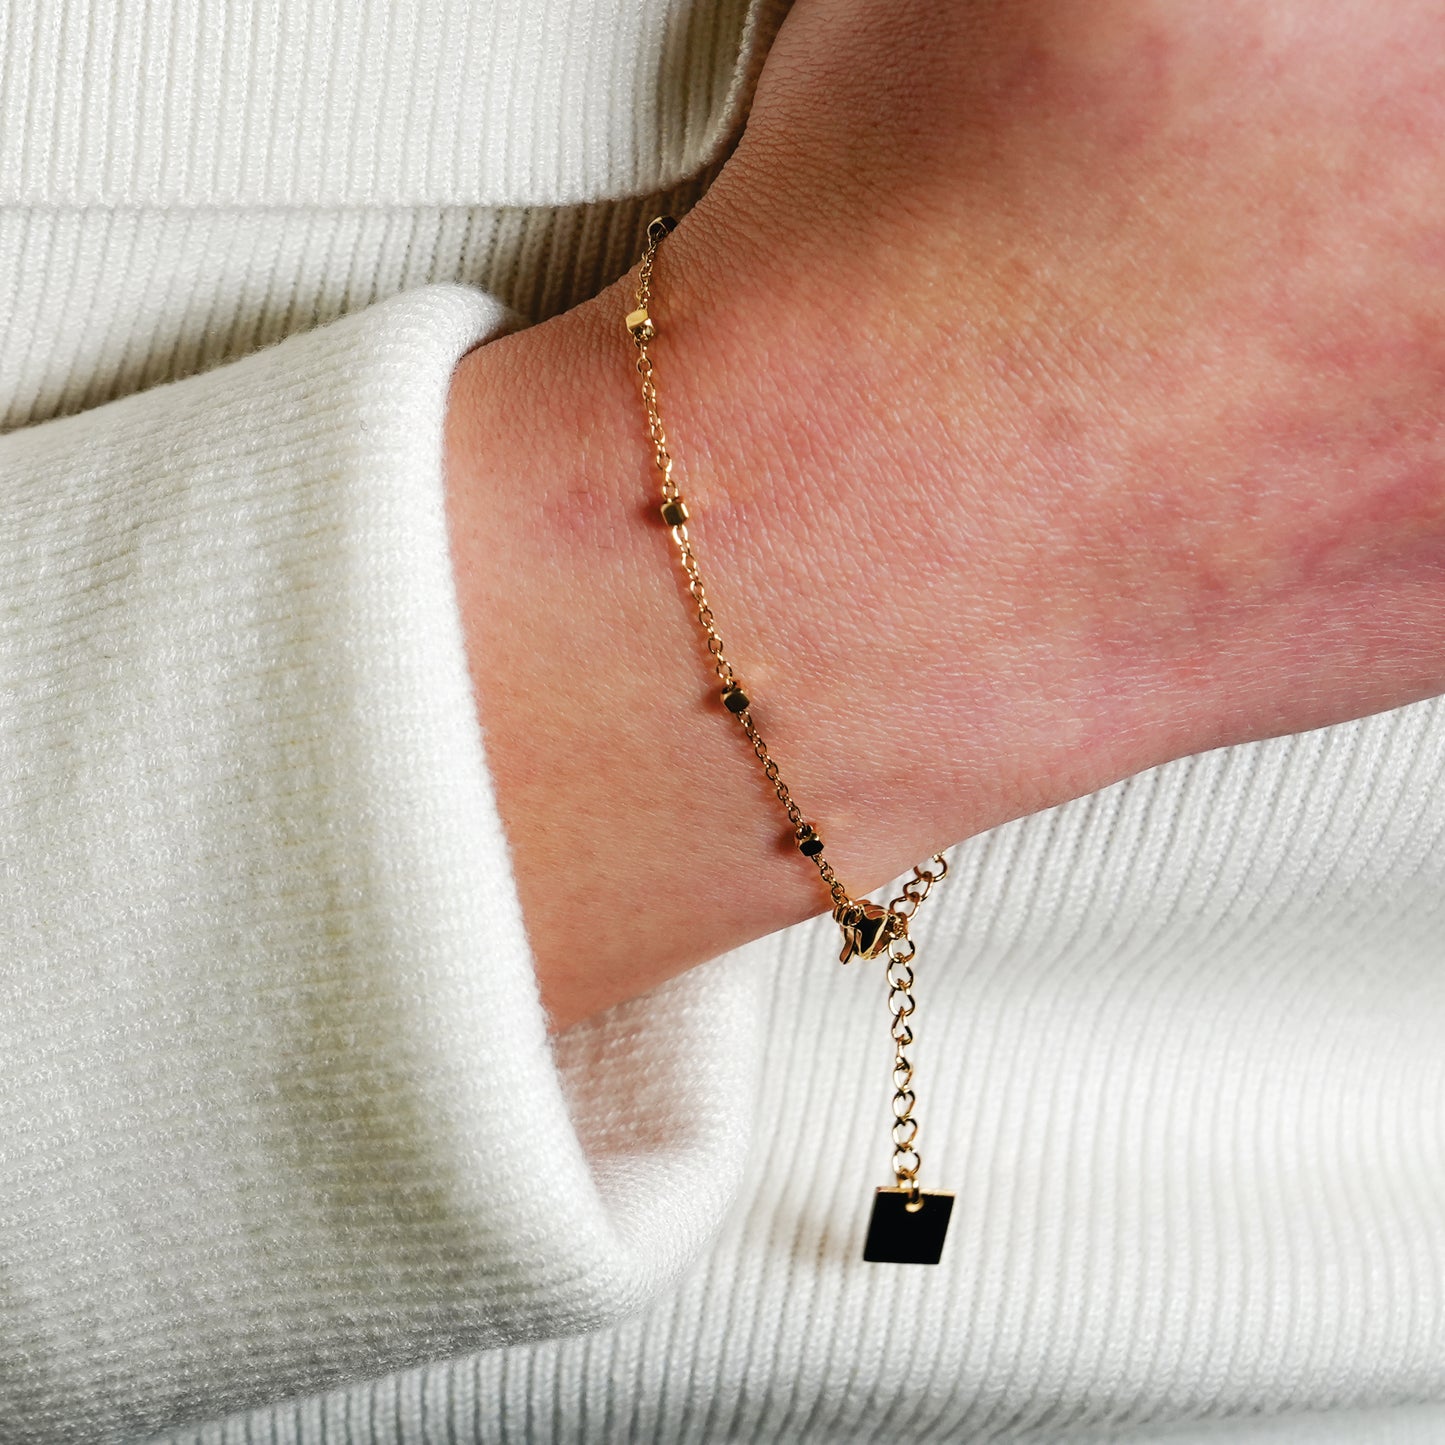 Style: DEMELZA: Essential Daily Bracelet with Delicate Square Beads.